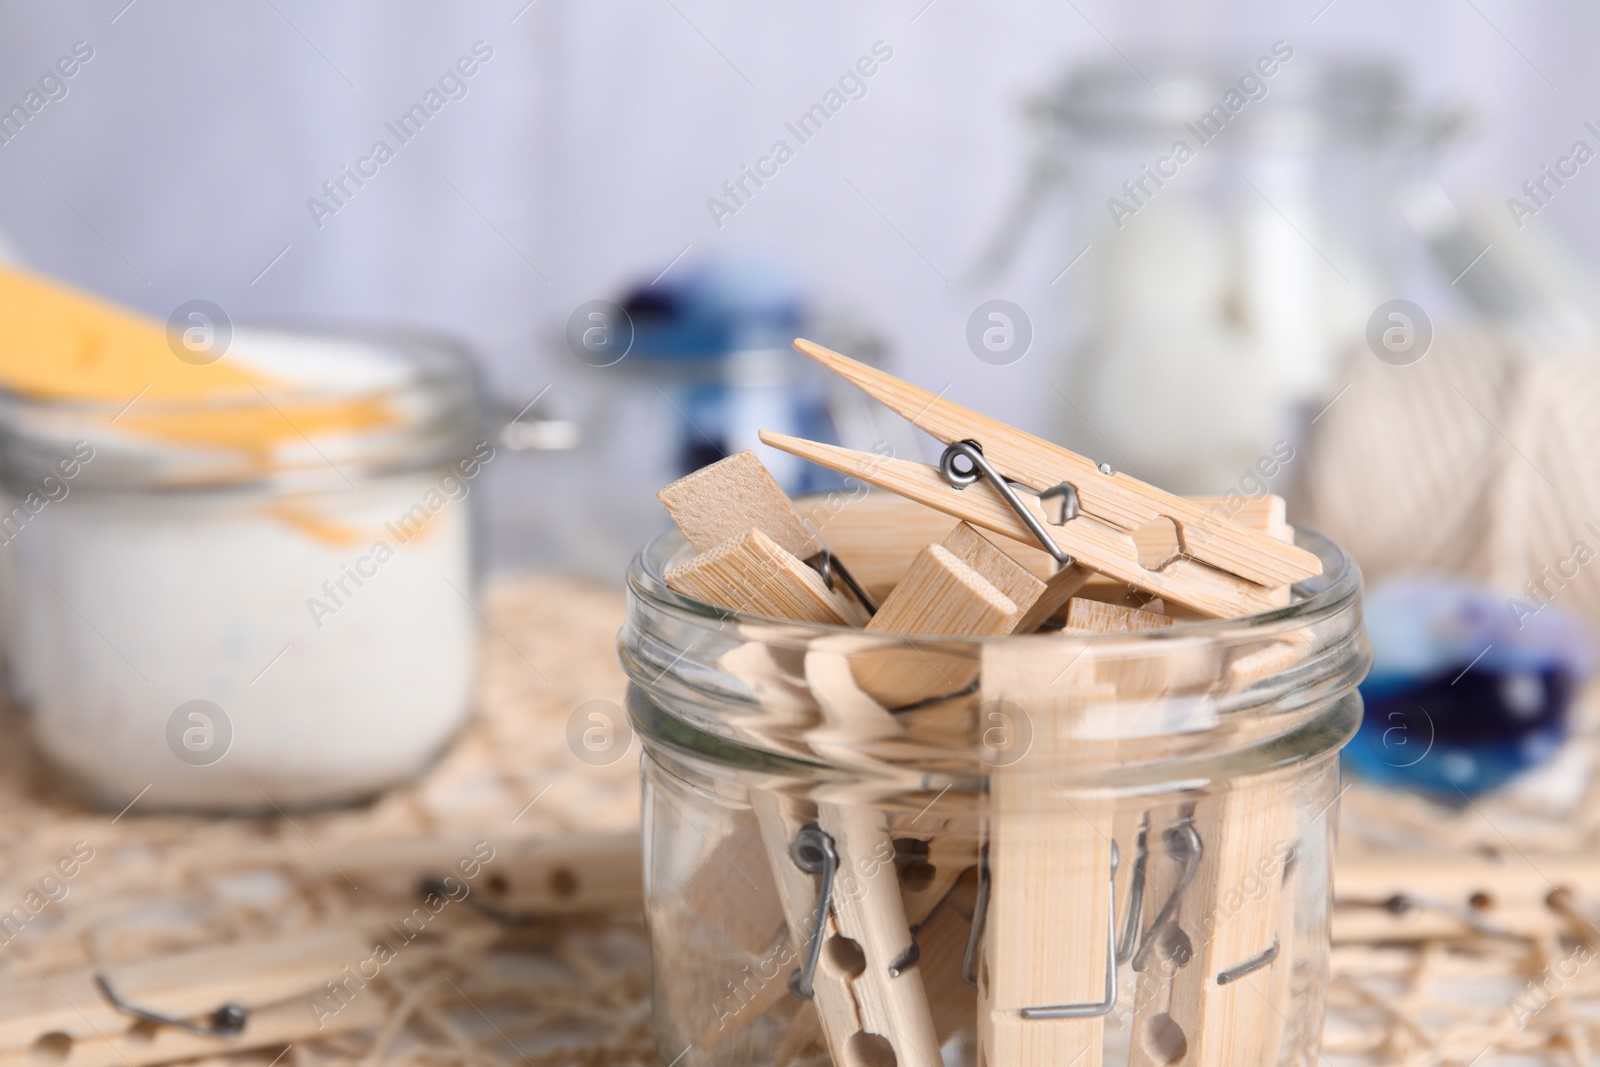 Photo of Many wooden clothespins in glass jar, closeup